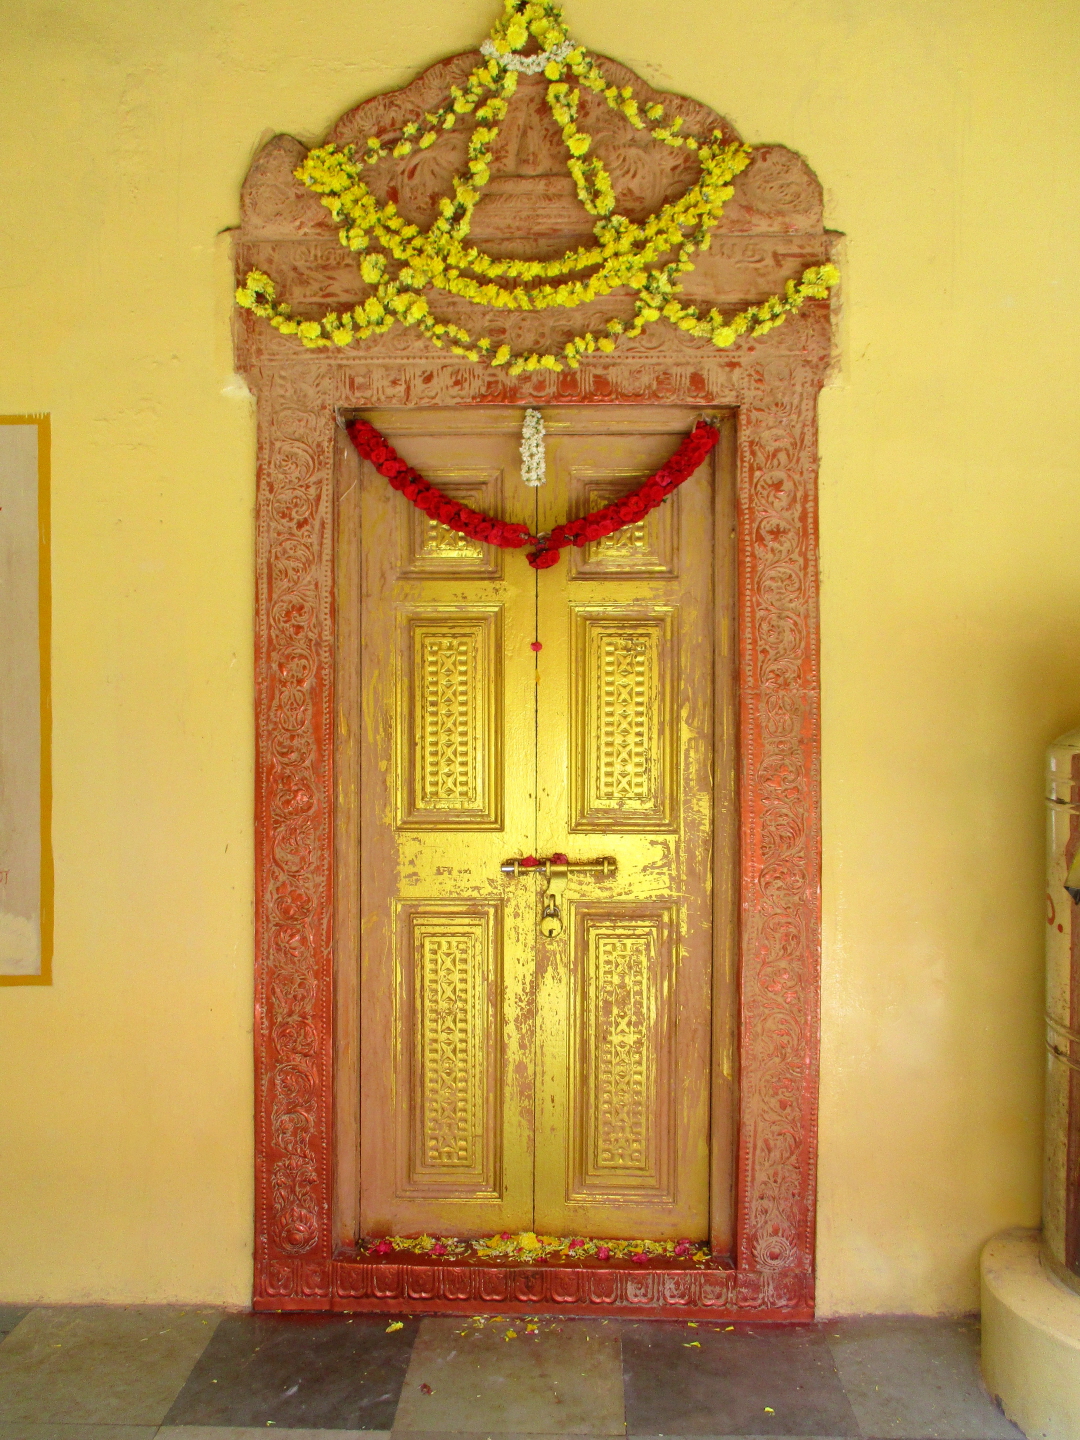 Shrine of Sri Ramalinga Swamigal Temple, where he disappeared into light behind the door